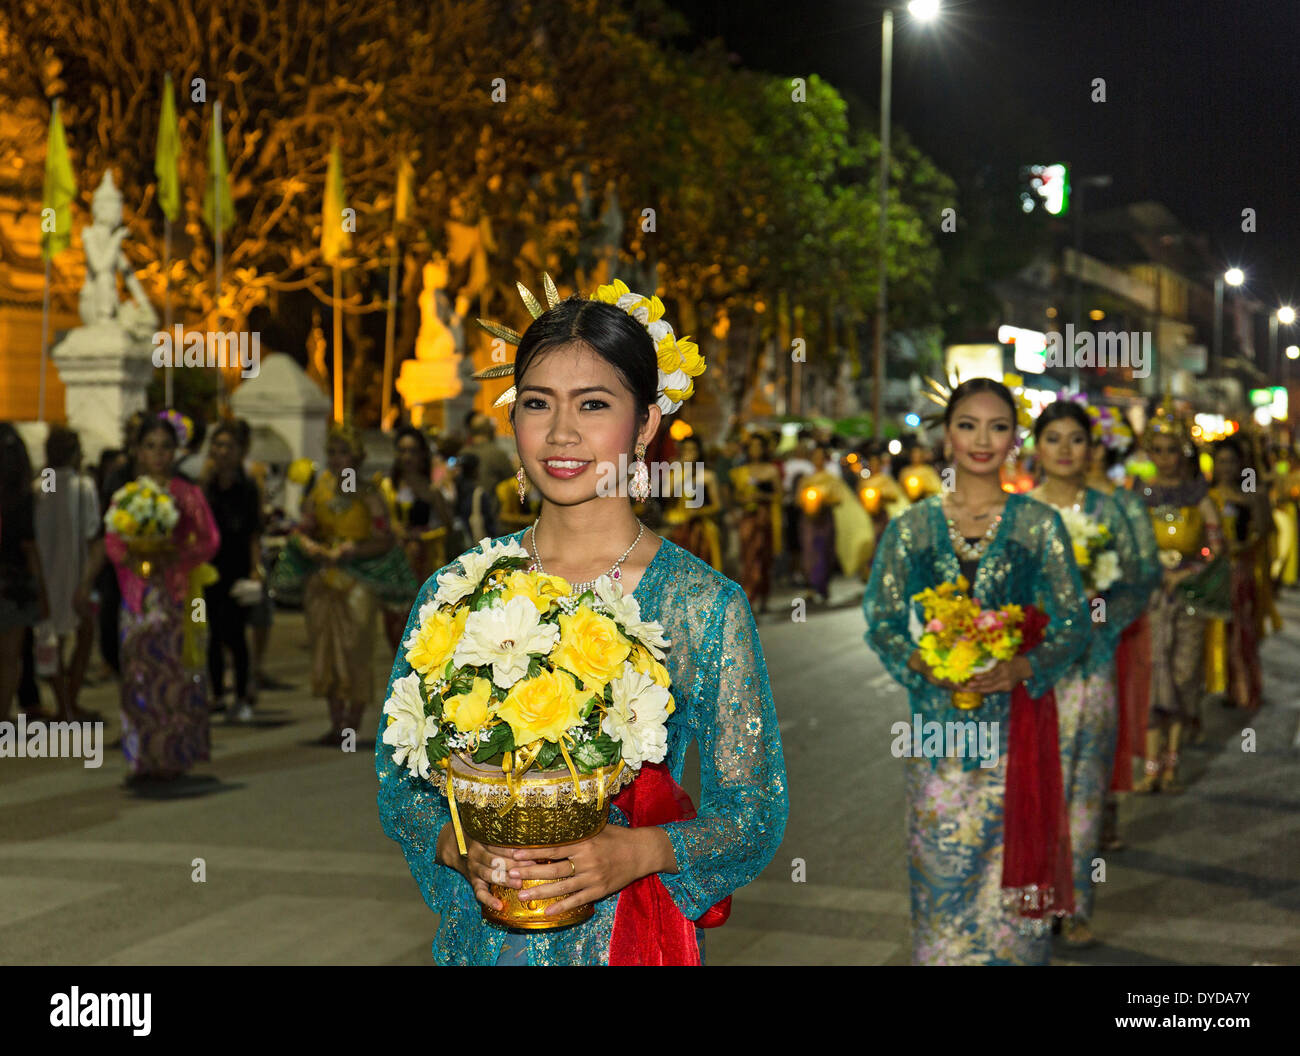 Women in traditional costume, parade, Loi Krathong Festival of Lights, Loy, Chiang Mai, Northern Thailand, Thailand Stock Photo